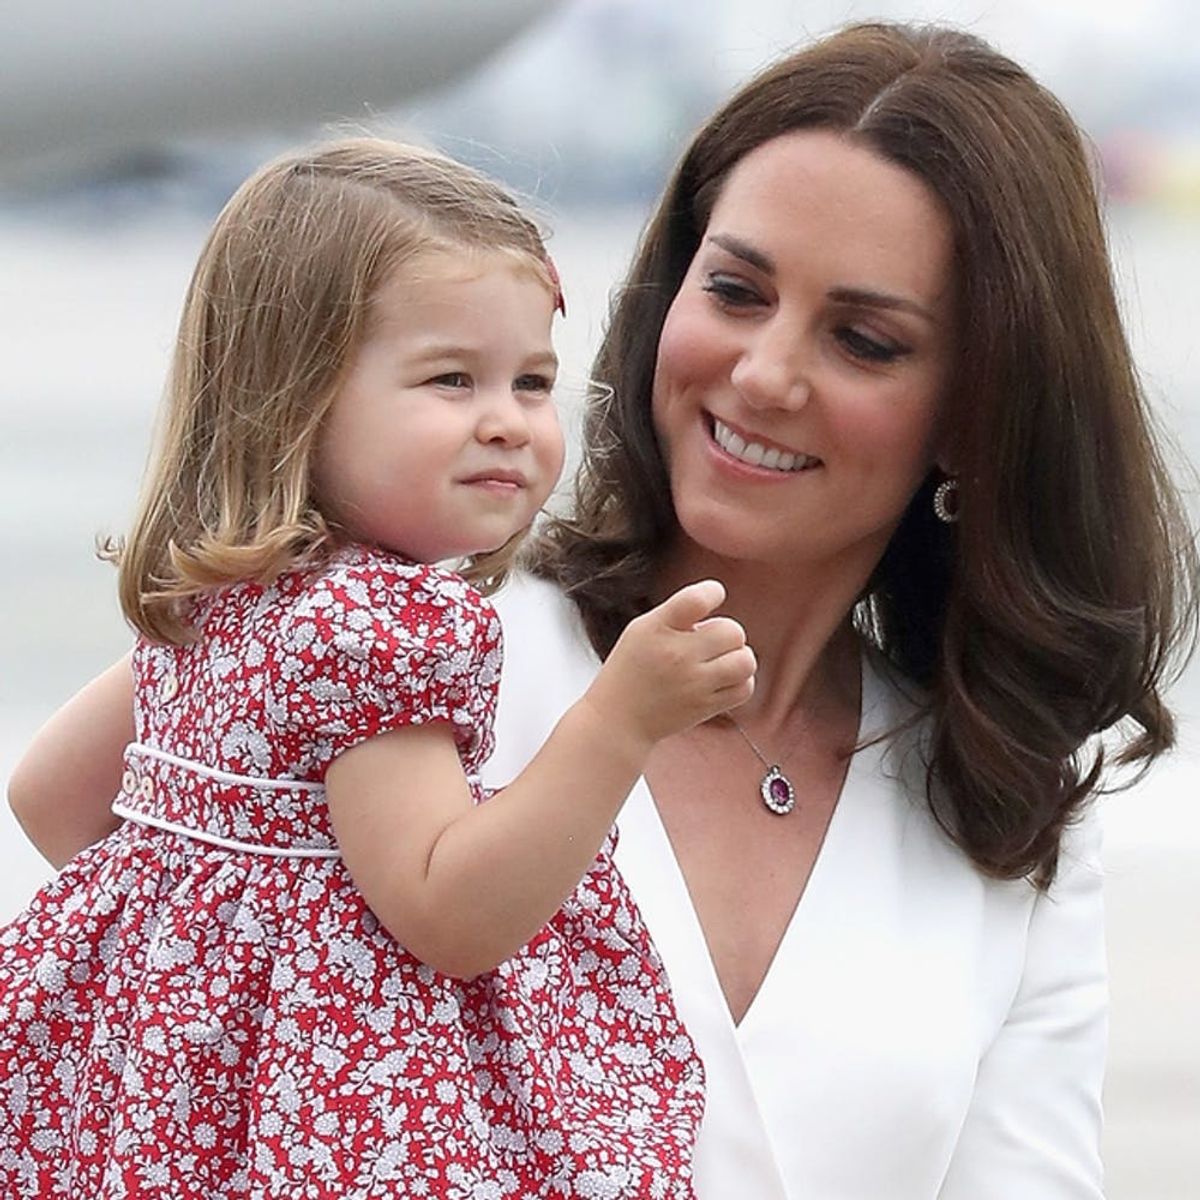 Princess Charlotte Just Wore an Adorable Royal Hand-Me-Down from Her Uncle